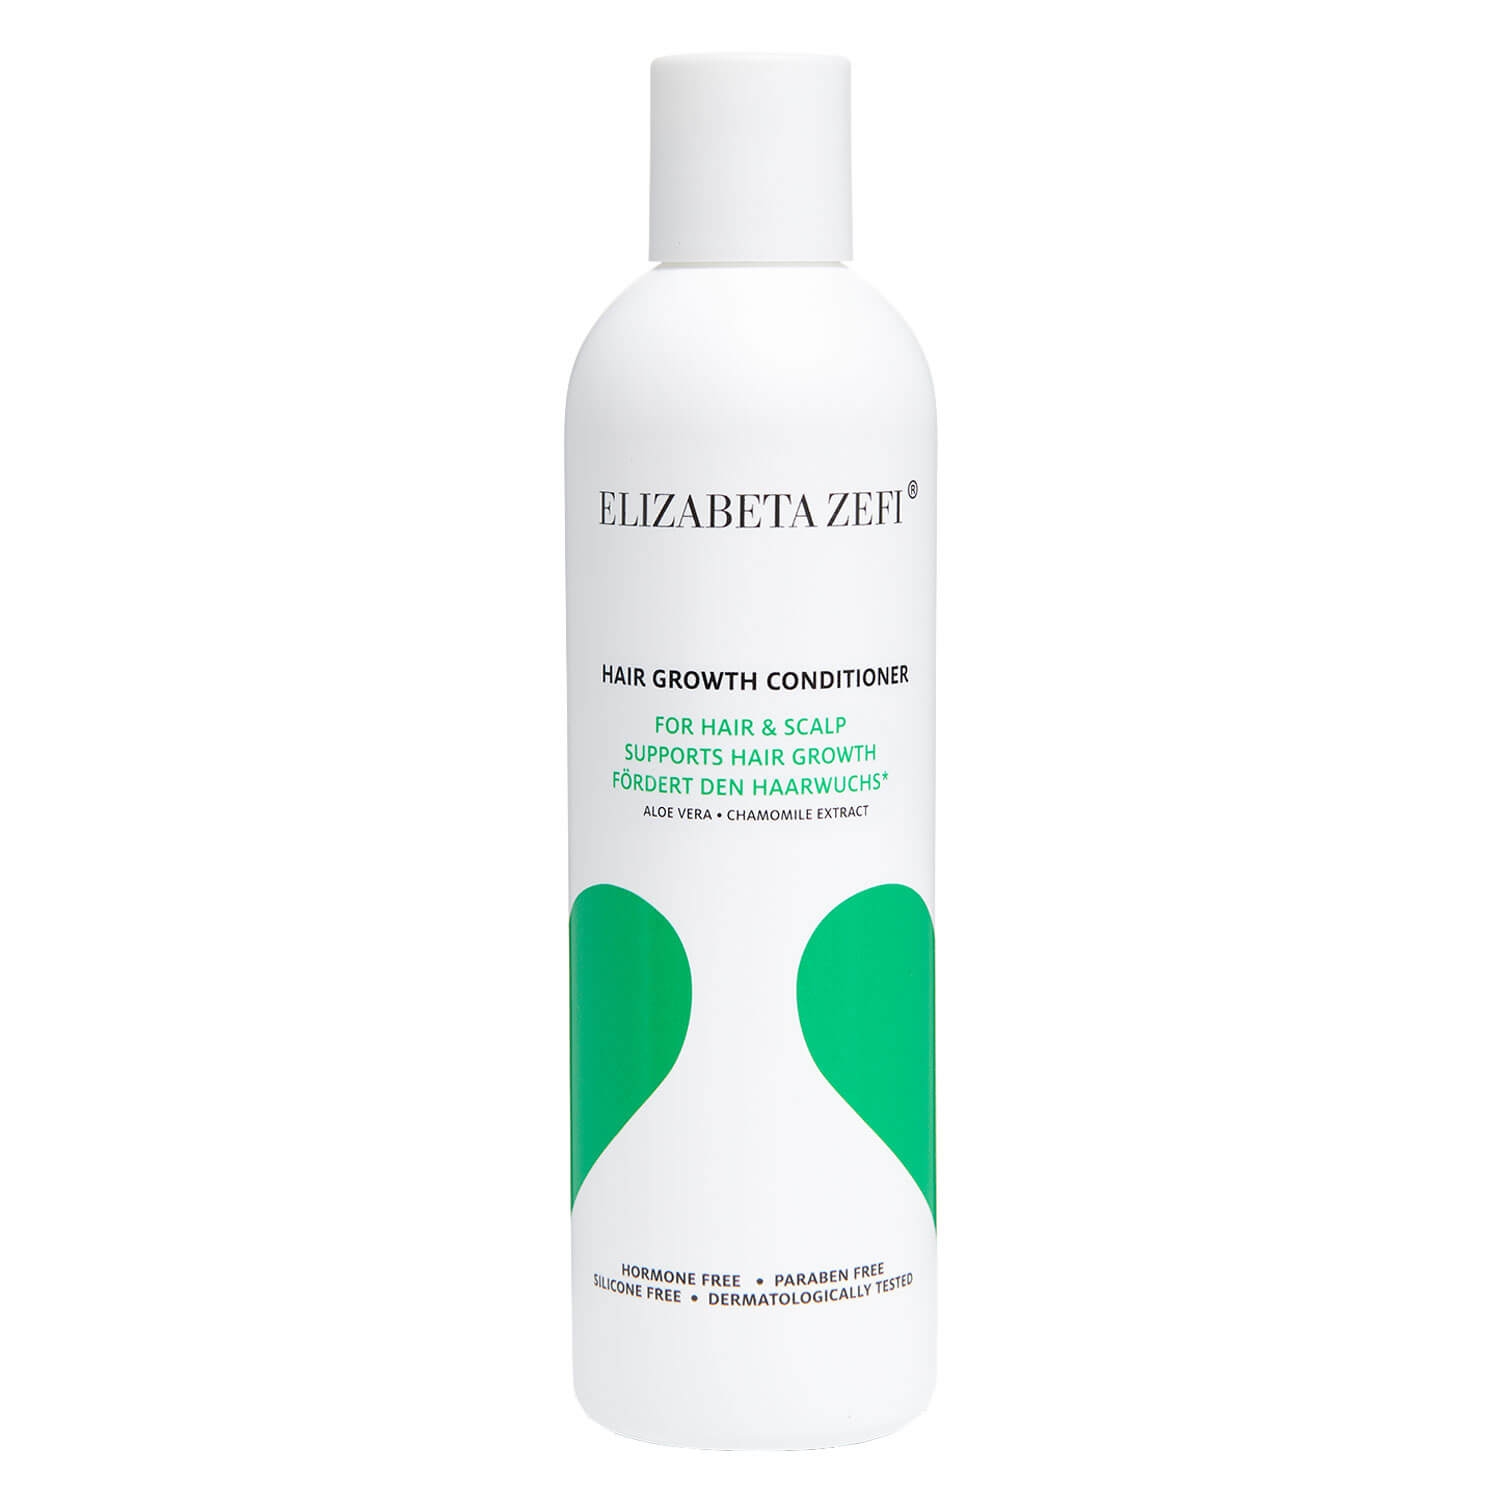 Product image from Elizabeta Zefi - Hair Growth Conditioner